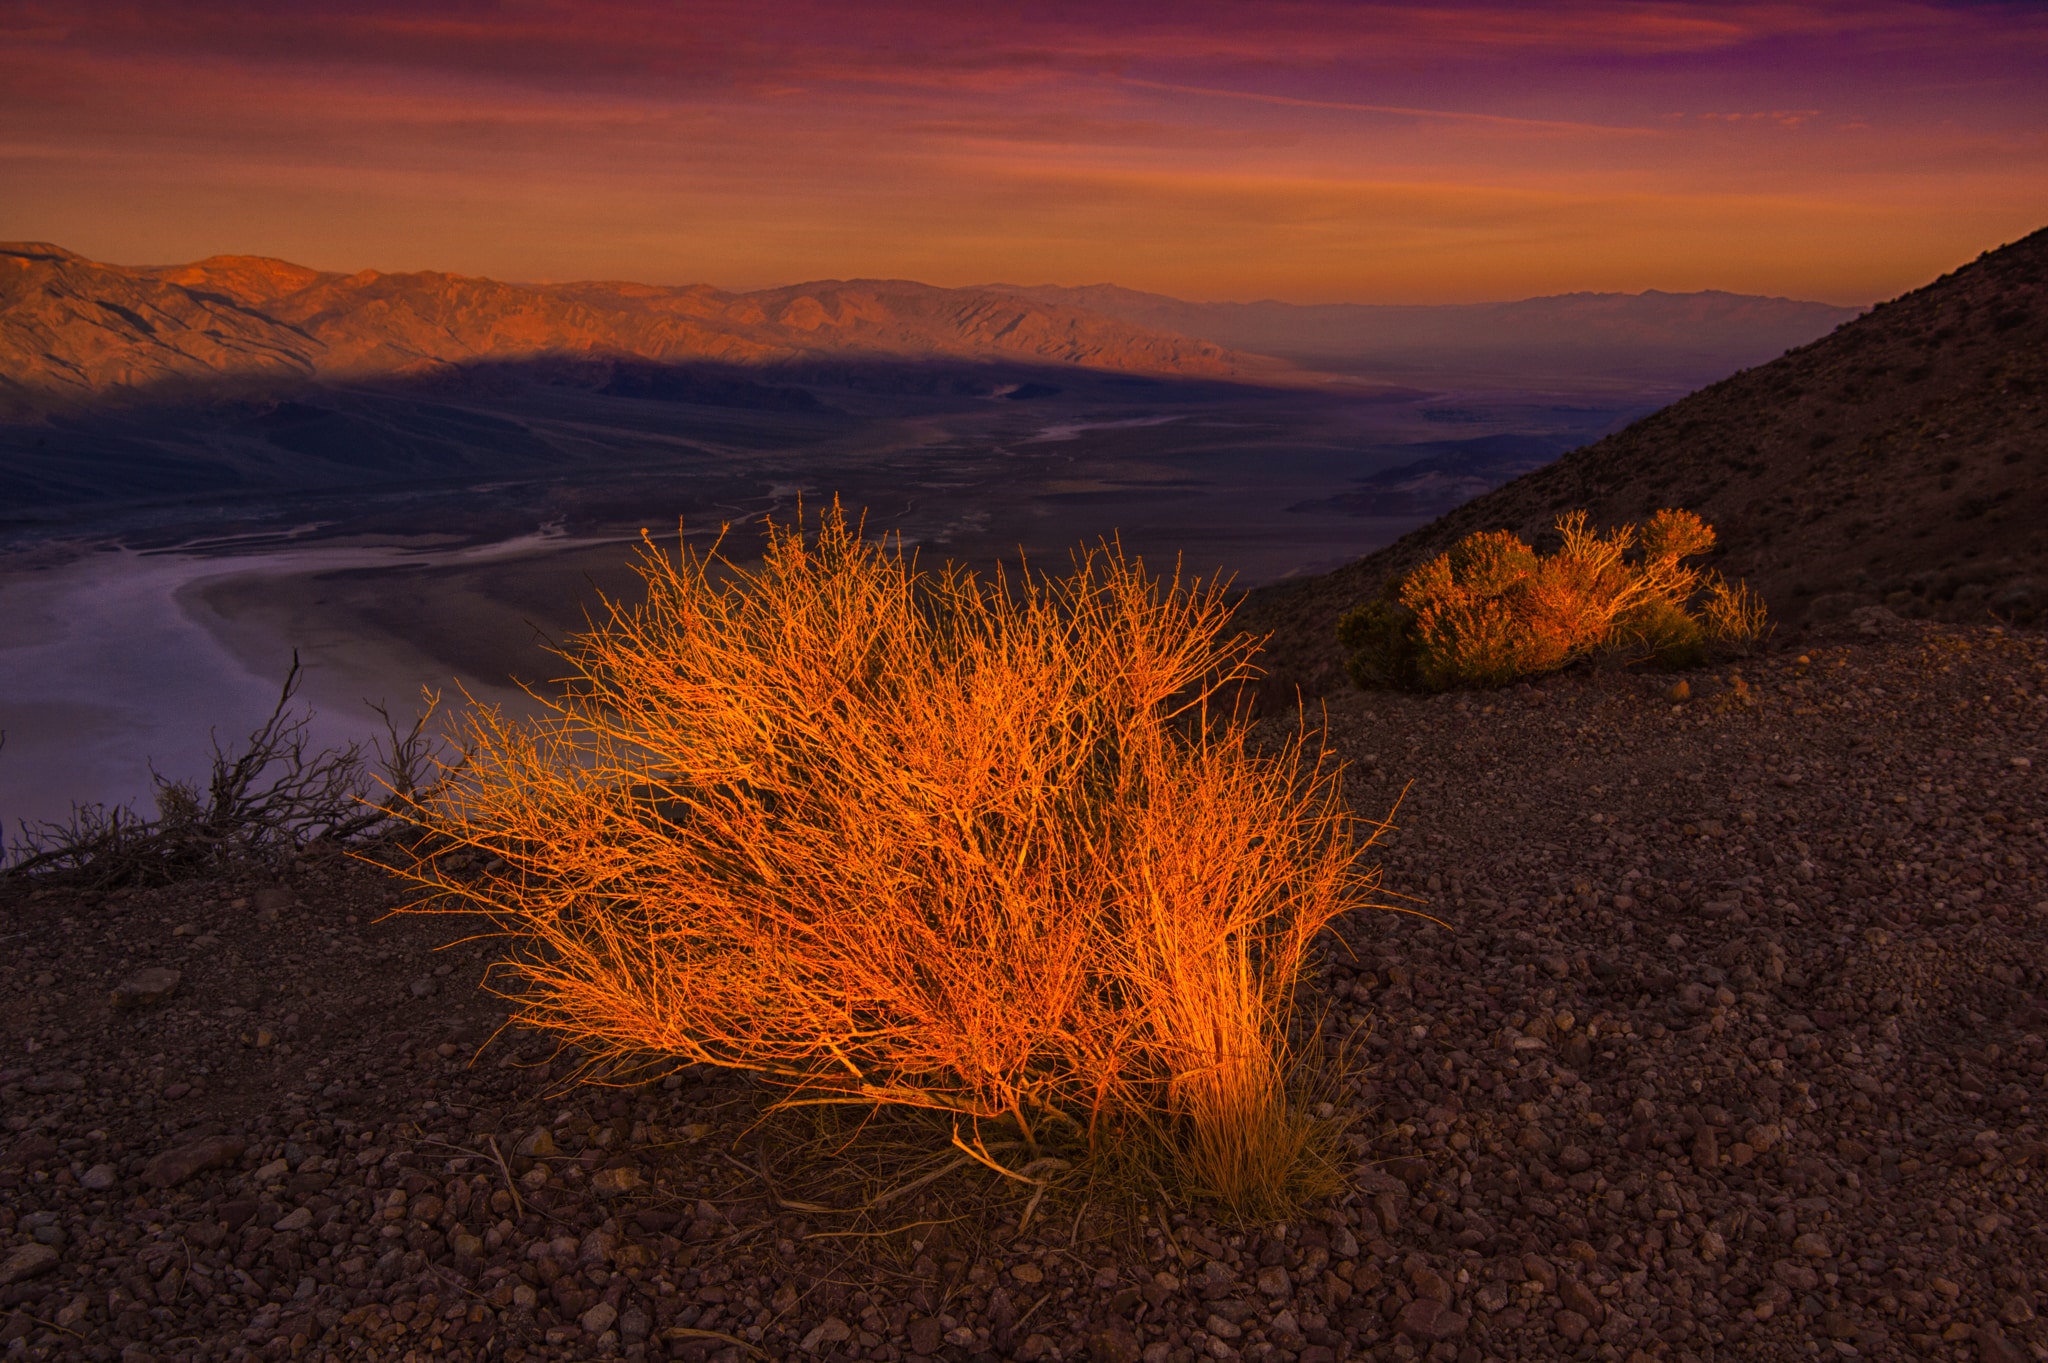 The rising sun illuminates desert brush at Dante's View, in the Black Mountains, 13 miles southwest of Highway 190 in Death Valley National Park, California.